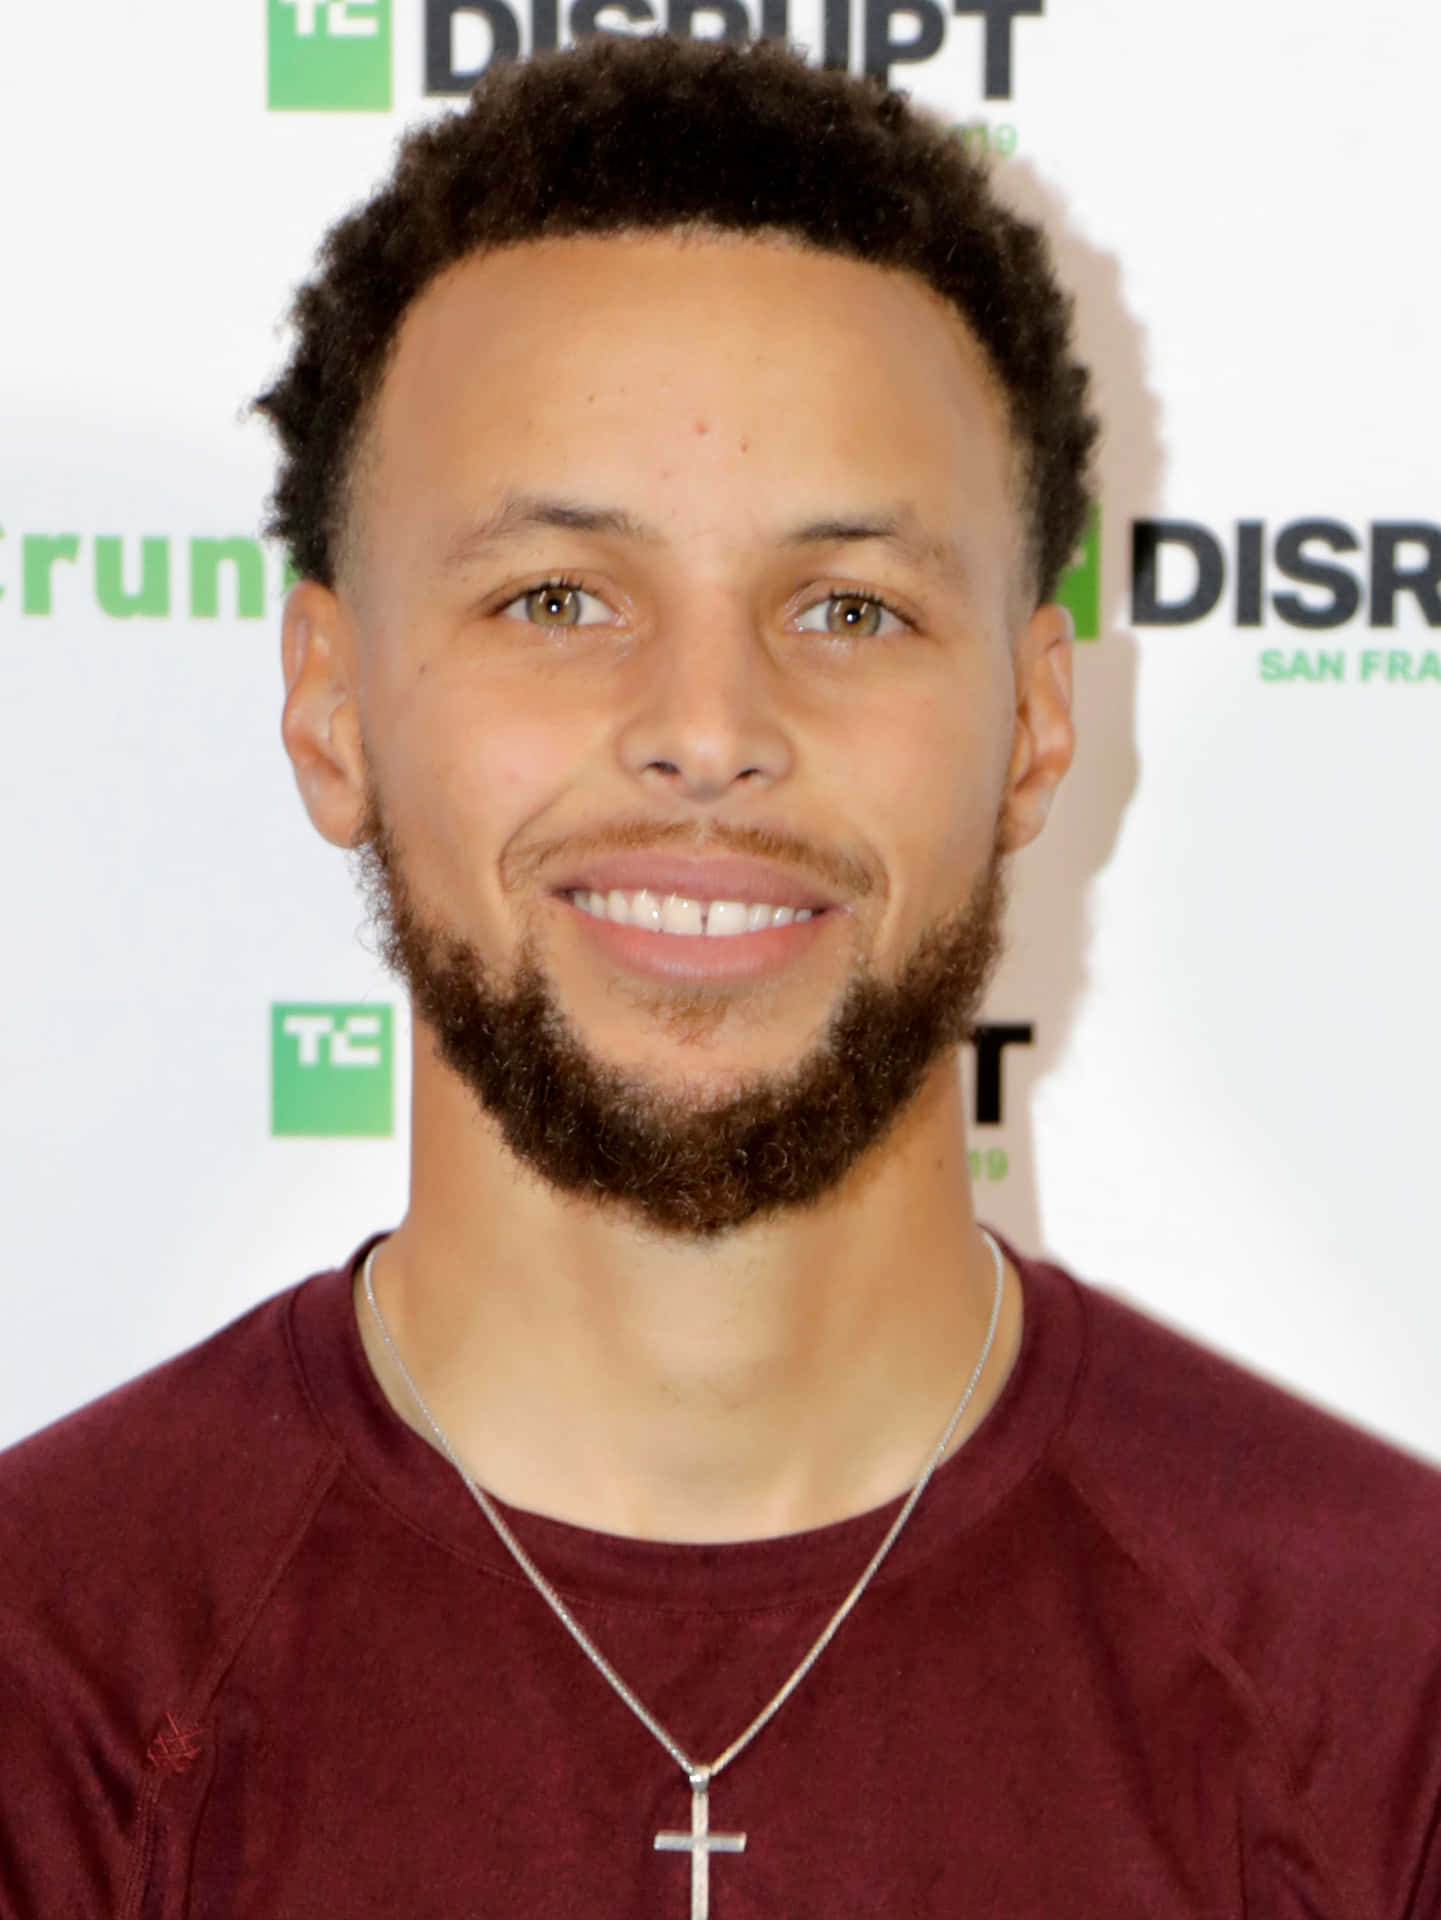 Nba Star Stephen Curry In Mid-action